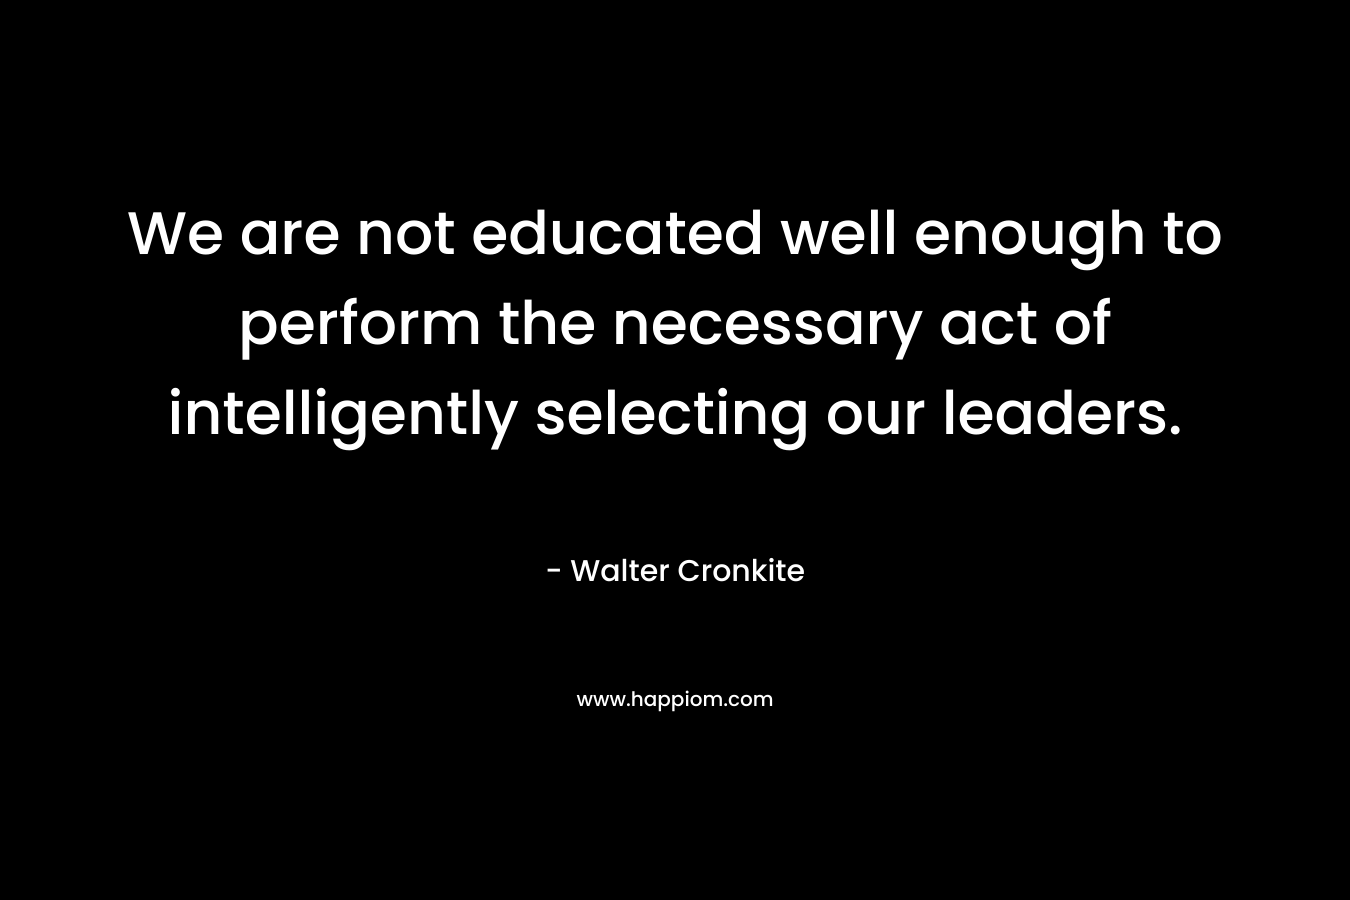 We are not educated well enough to perform the necessary act of intelligently selecting our leaders. – Walter Cronkite